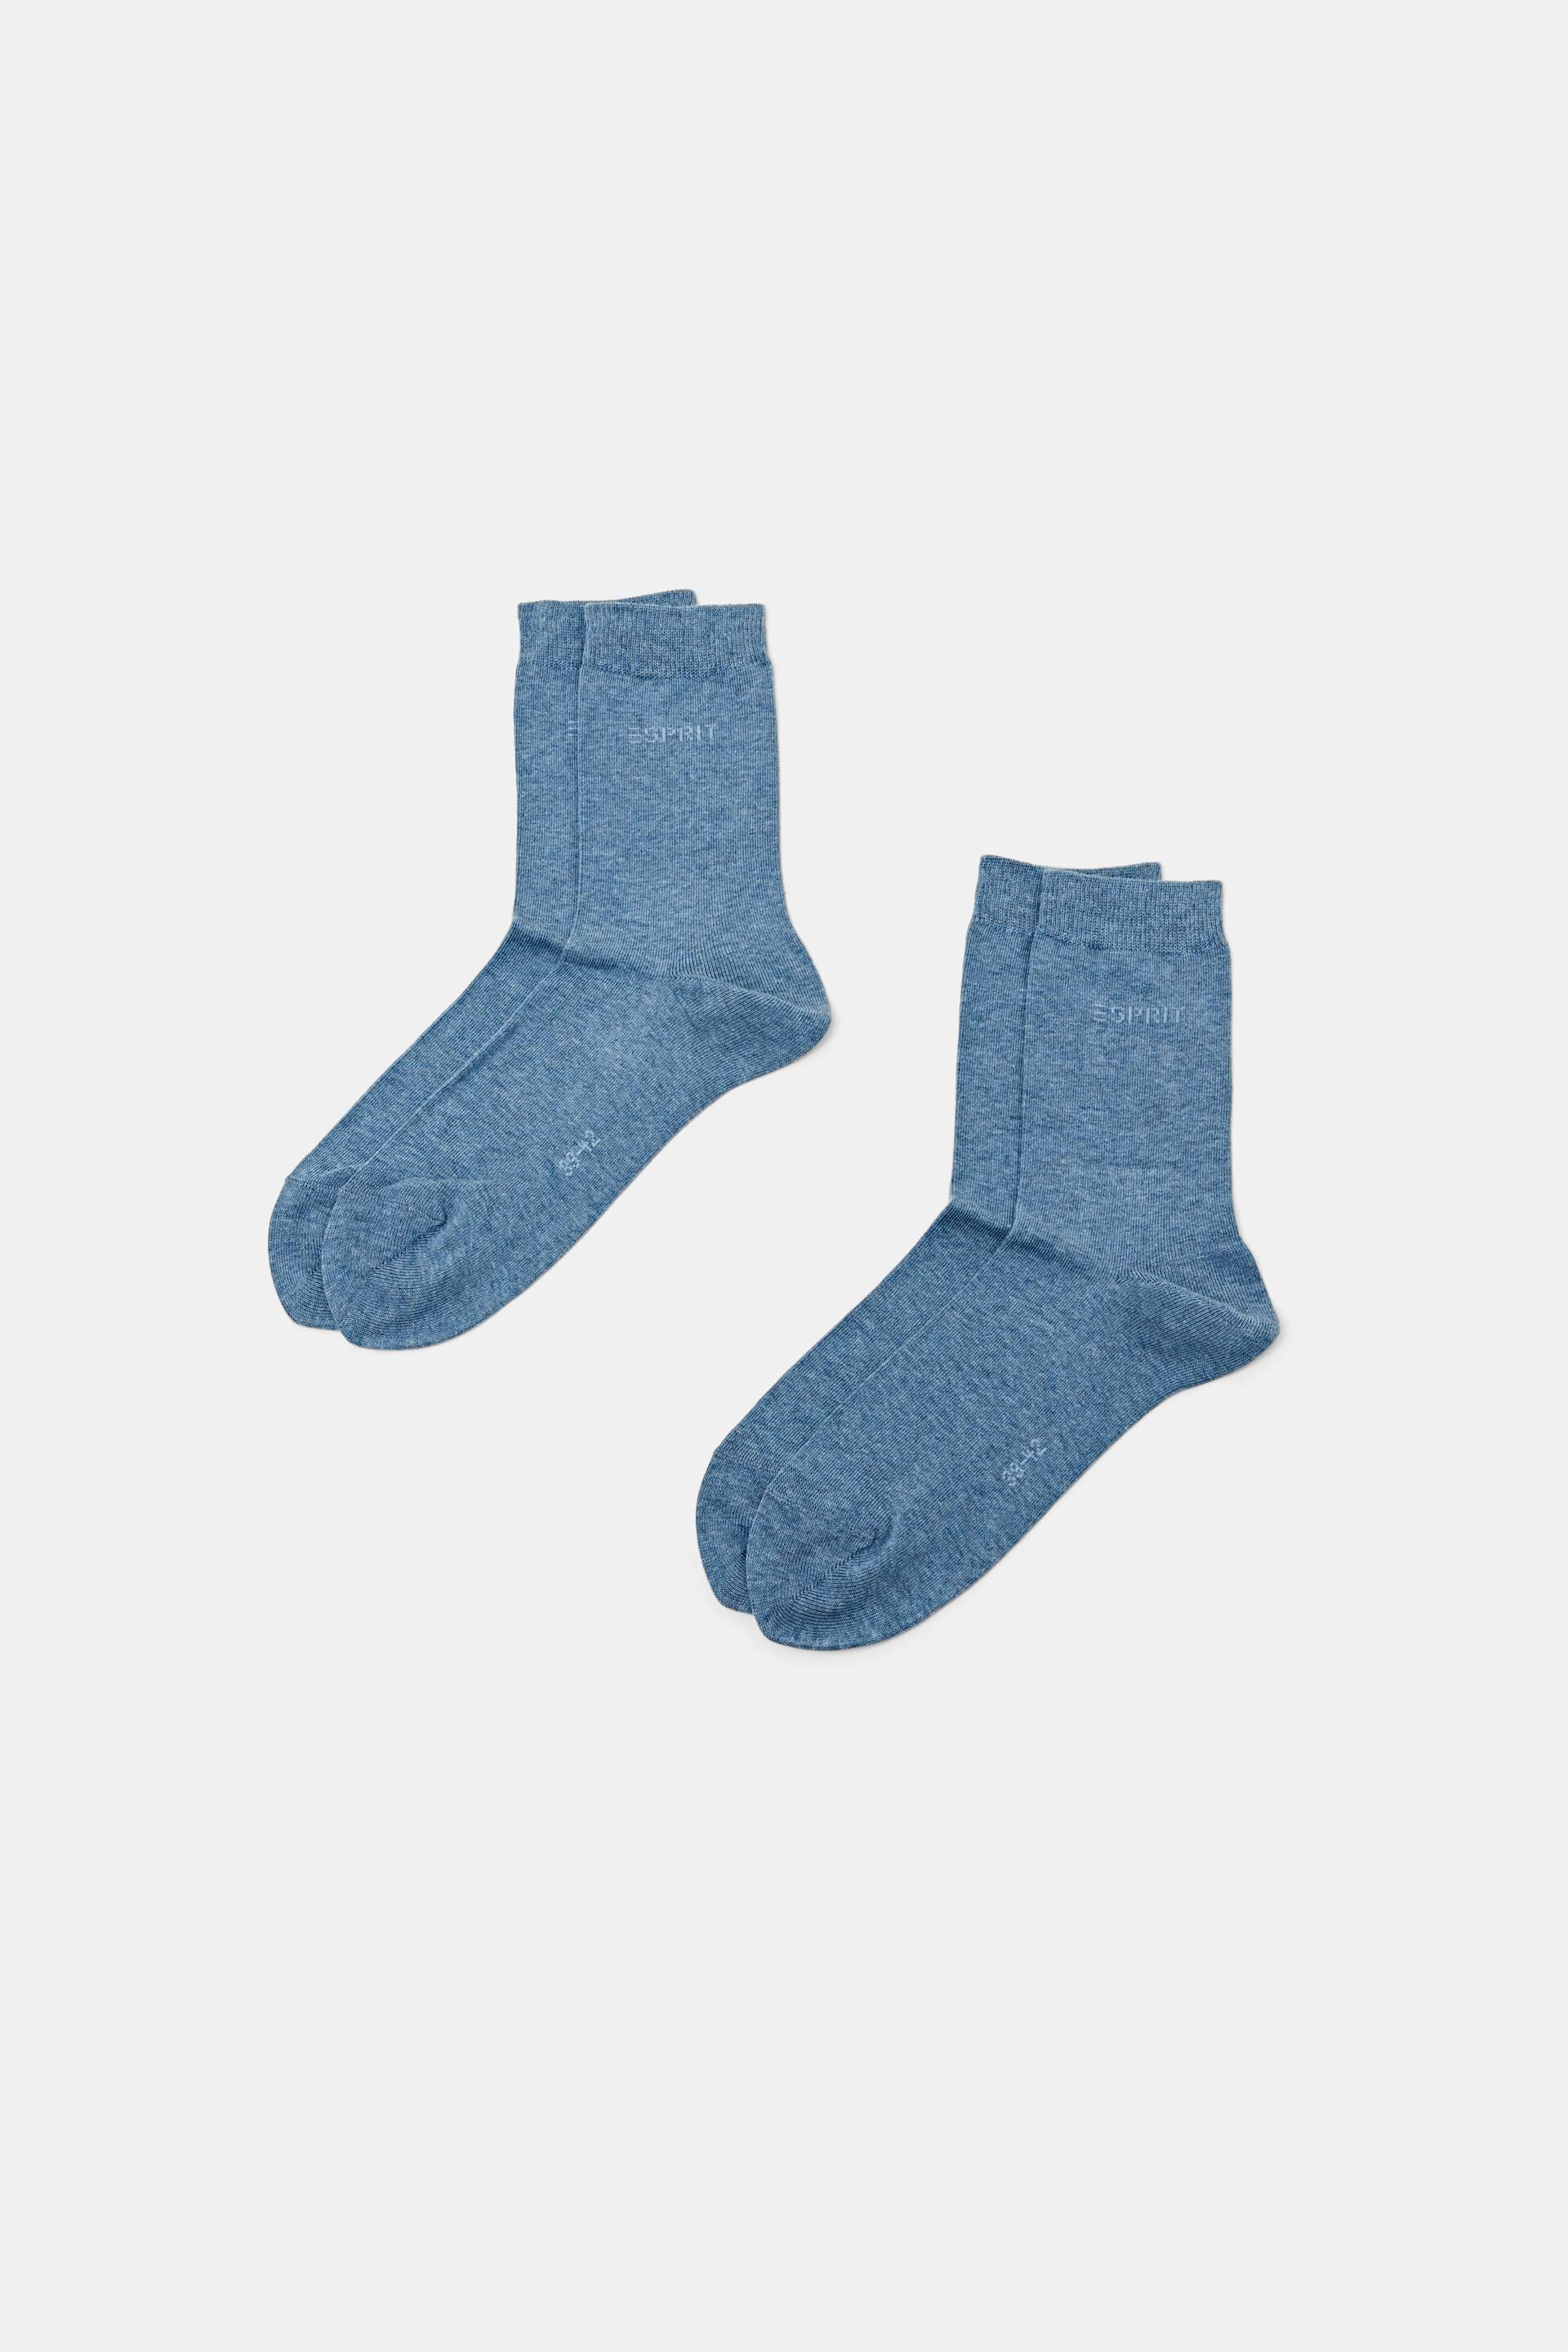 Esprit cotton organic of socks with knitted 2-pack logo,